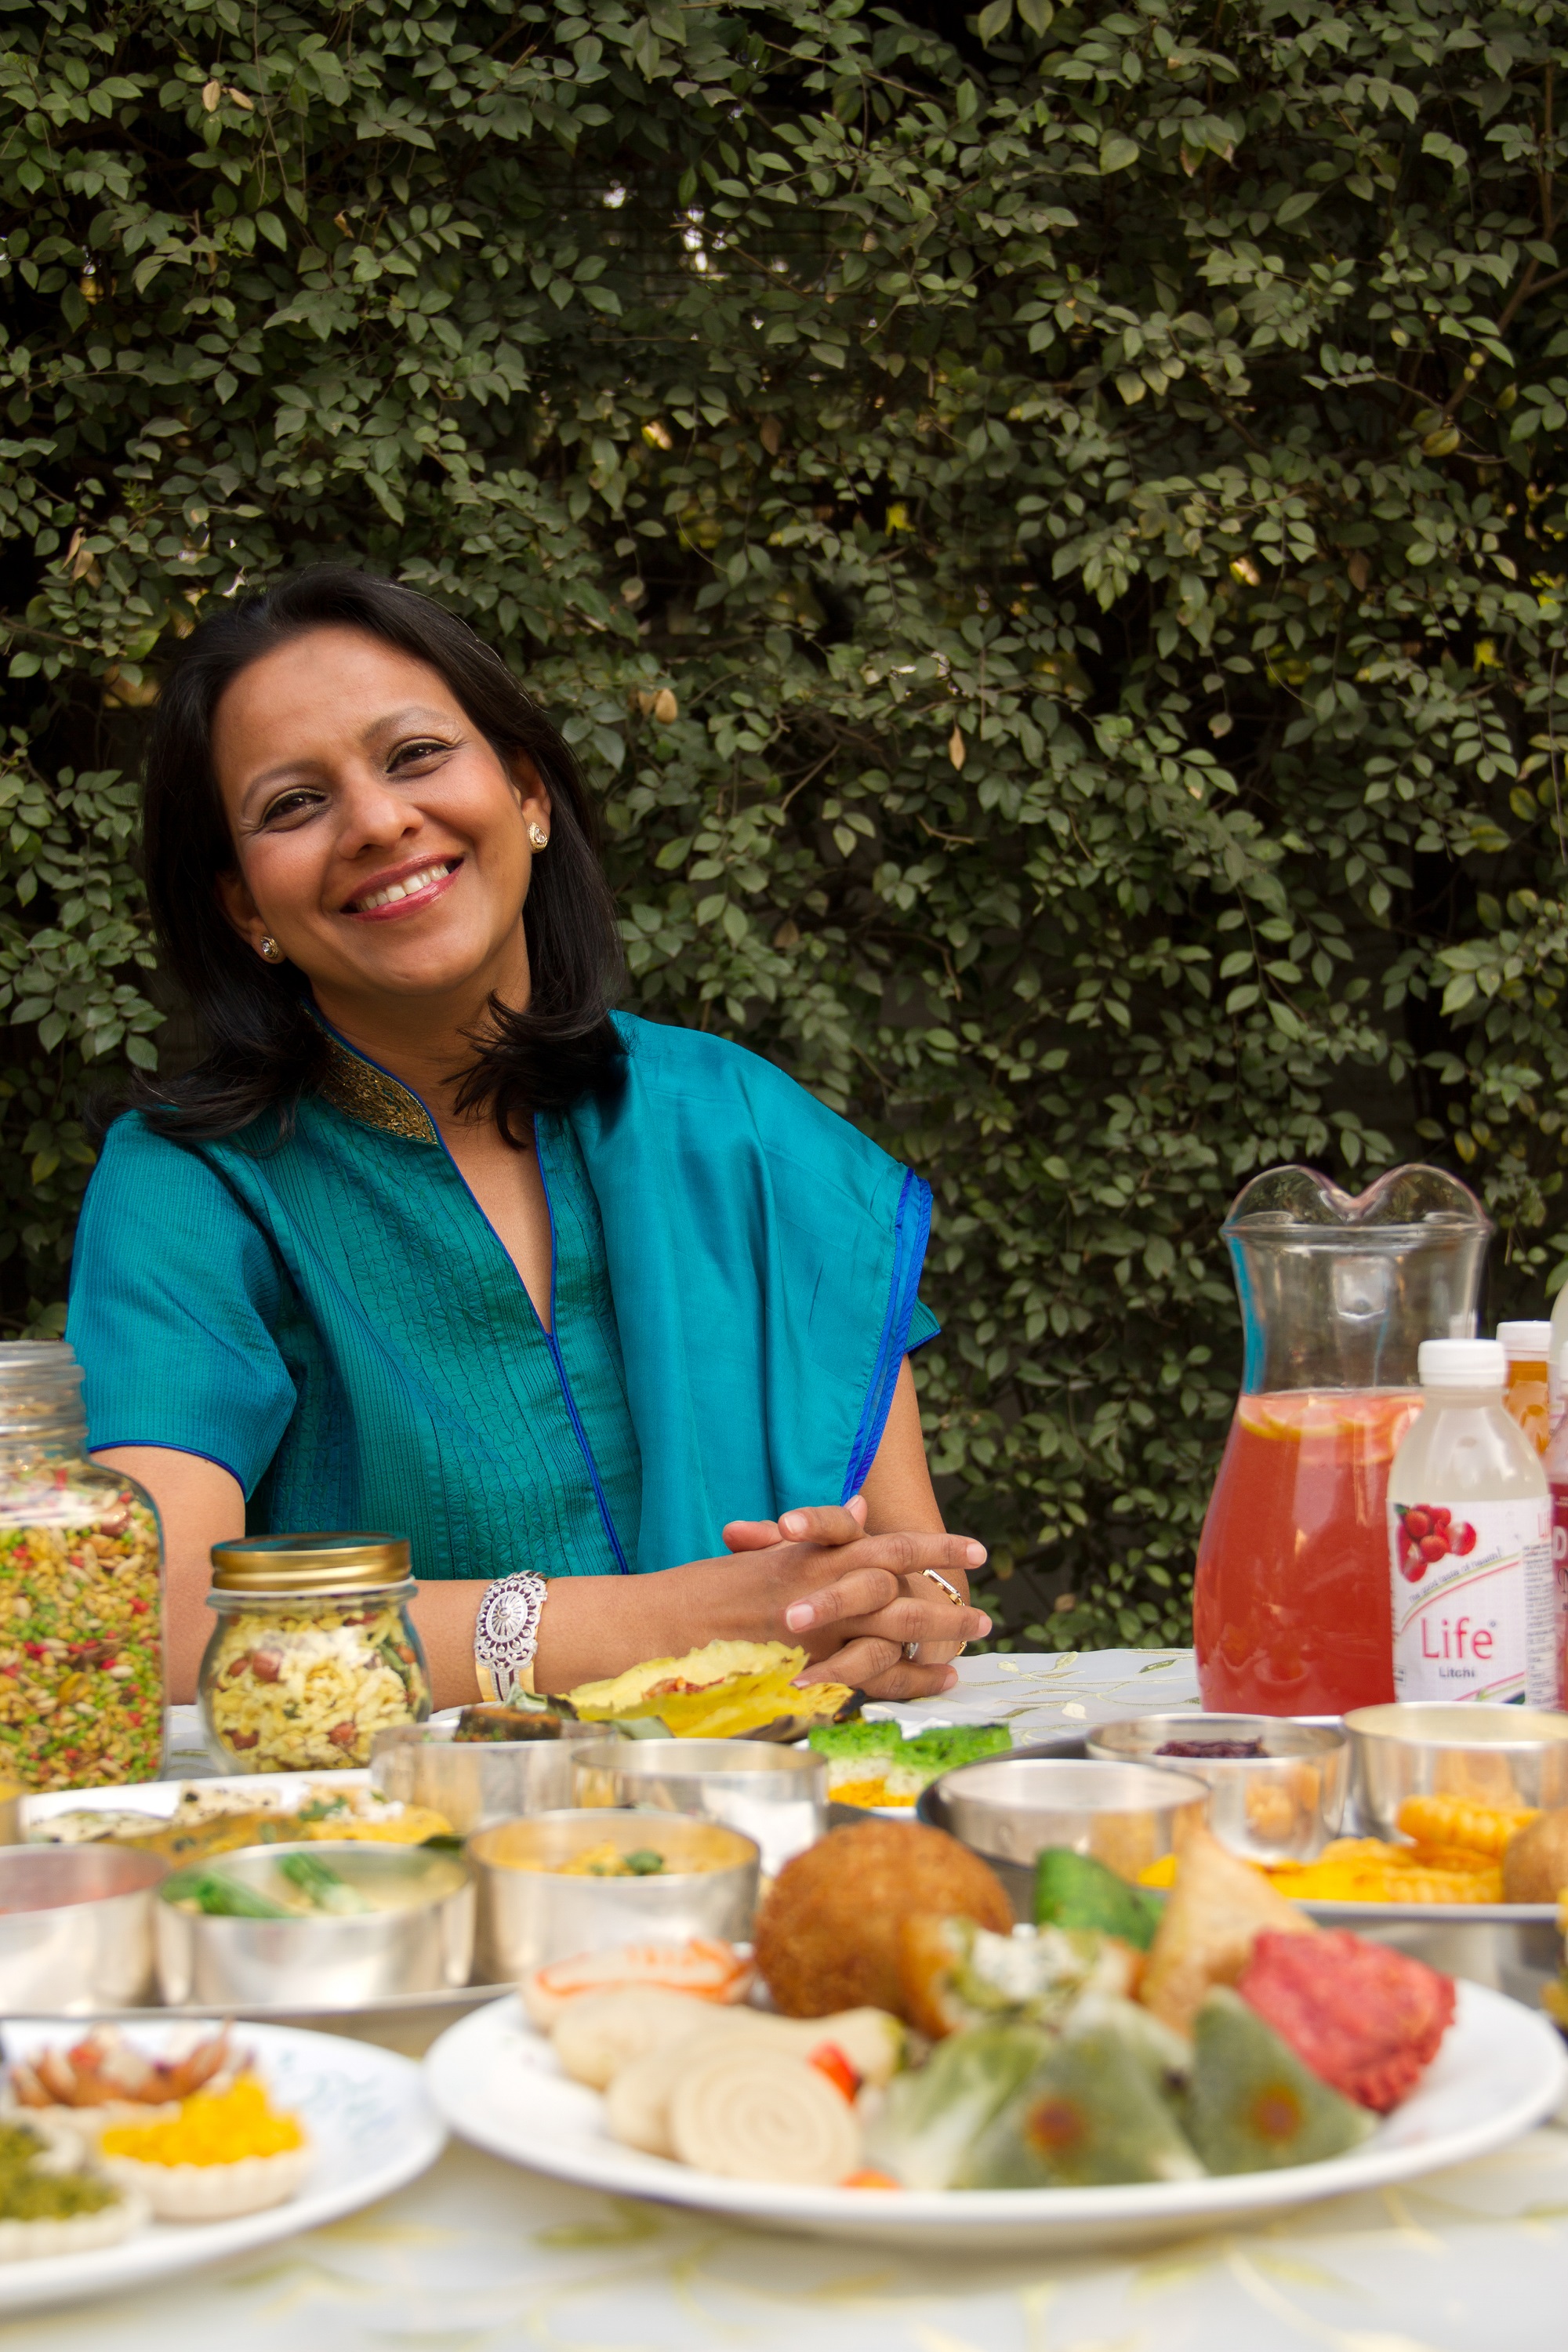 Mrs. Bharti Sanghi, founder of Life Home alone brand